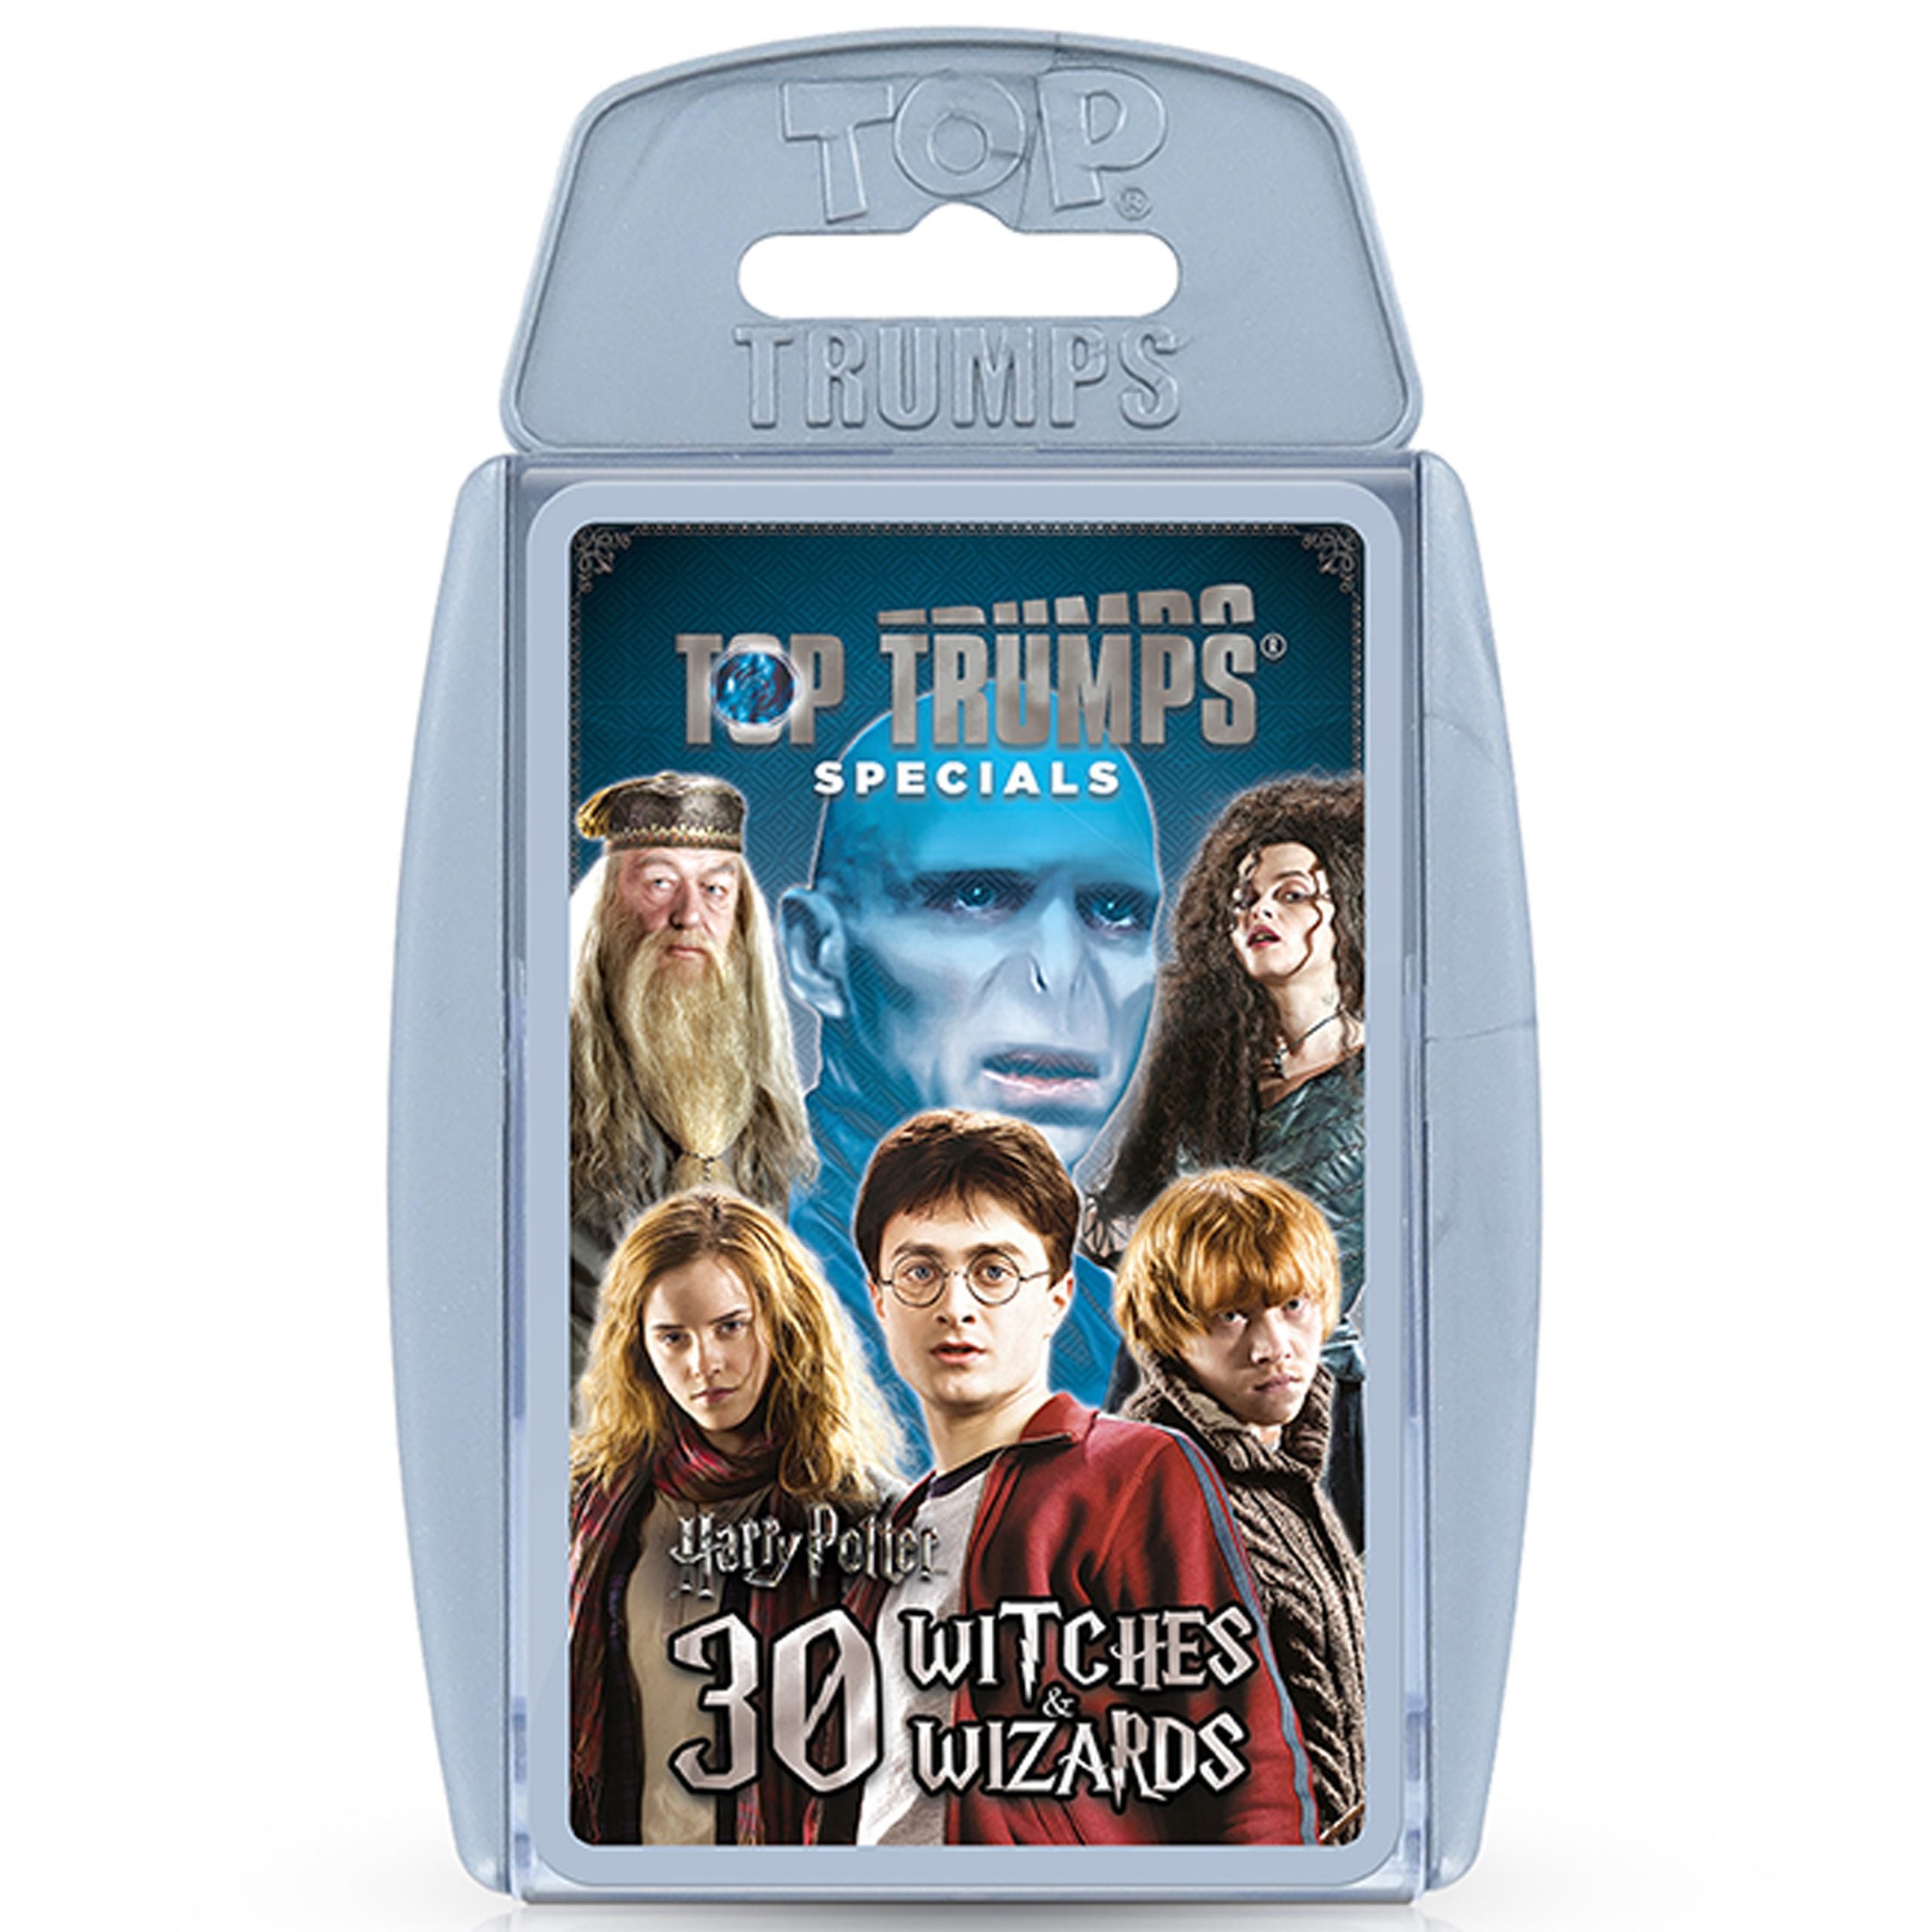 Top Trumps: Harry Potter Witches & Wizards